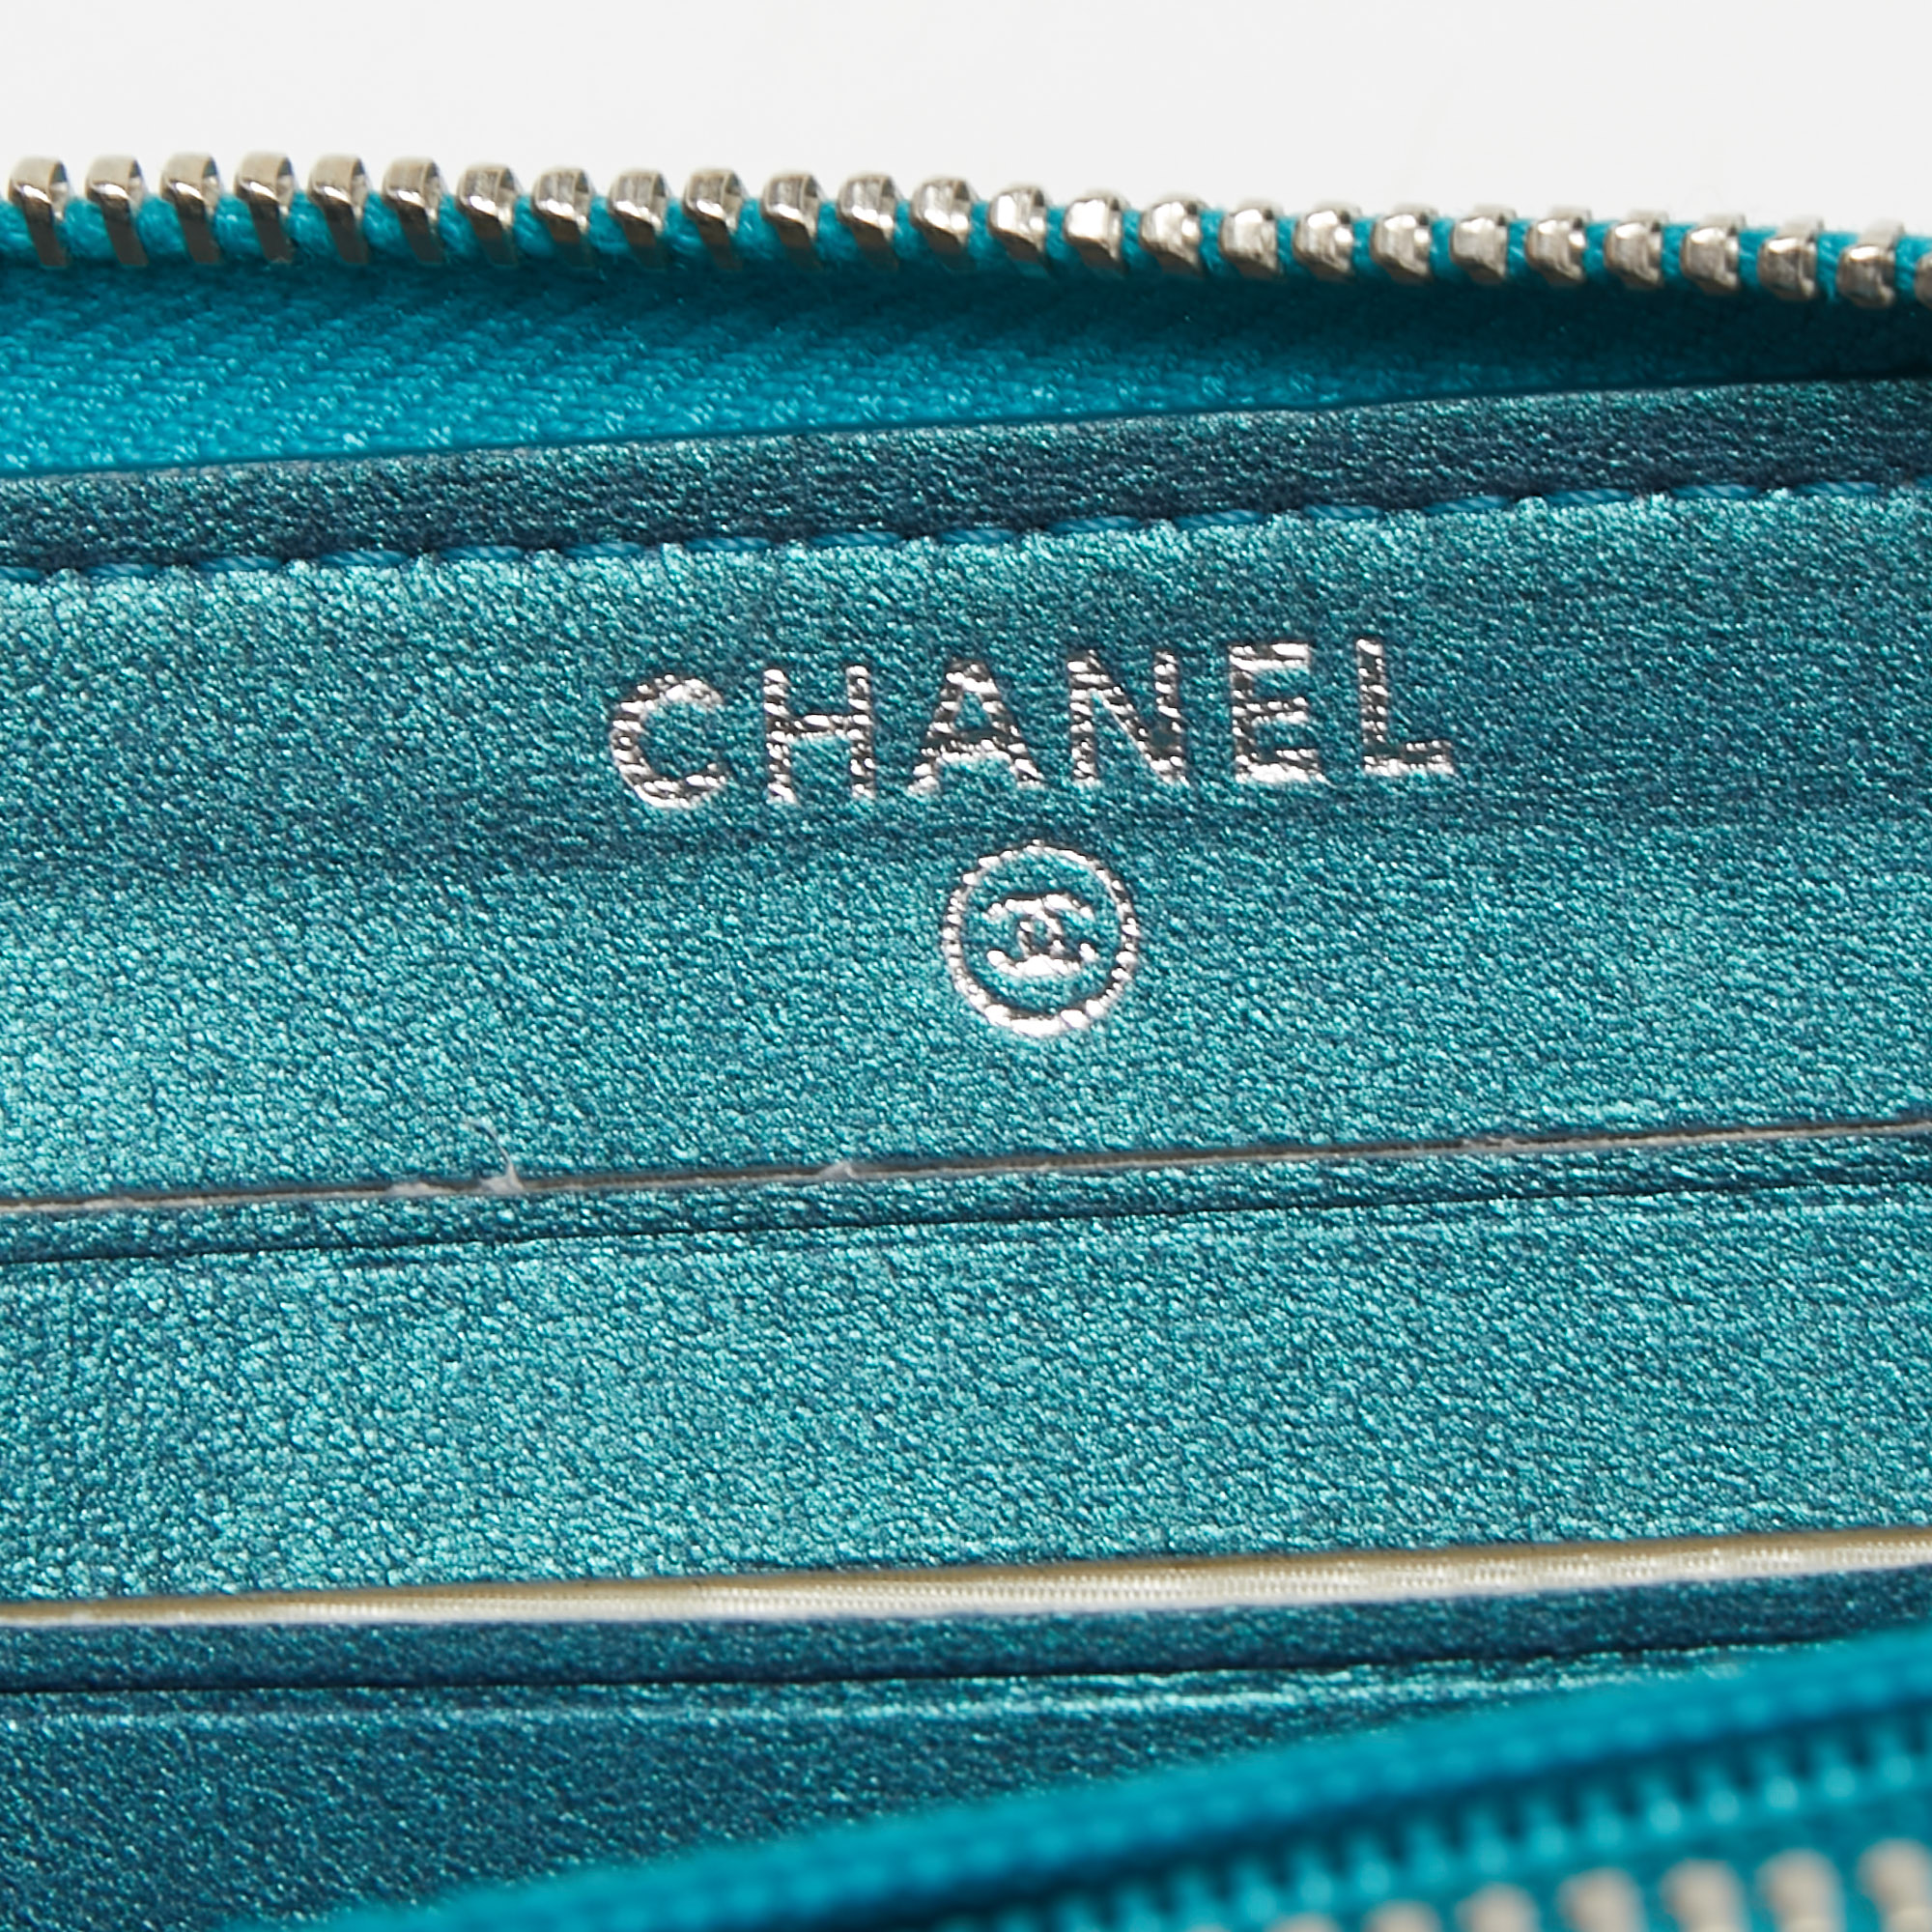 Chanel Metallic Blue Quilted Leather Classic Zip Wallet